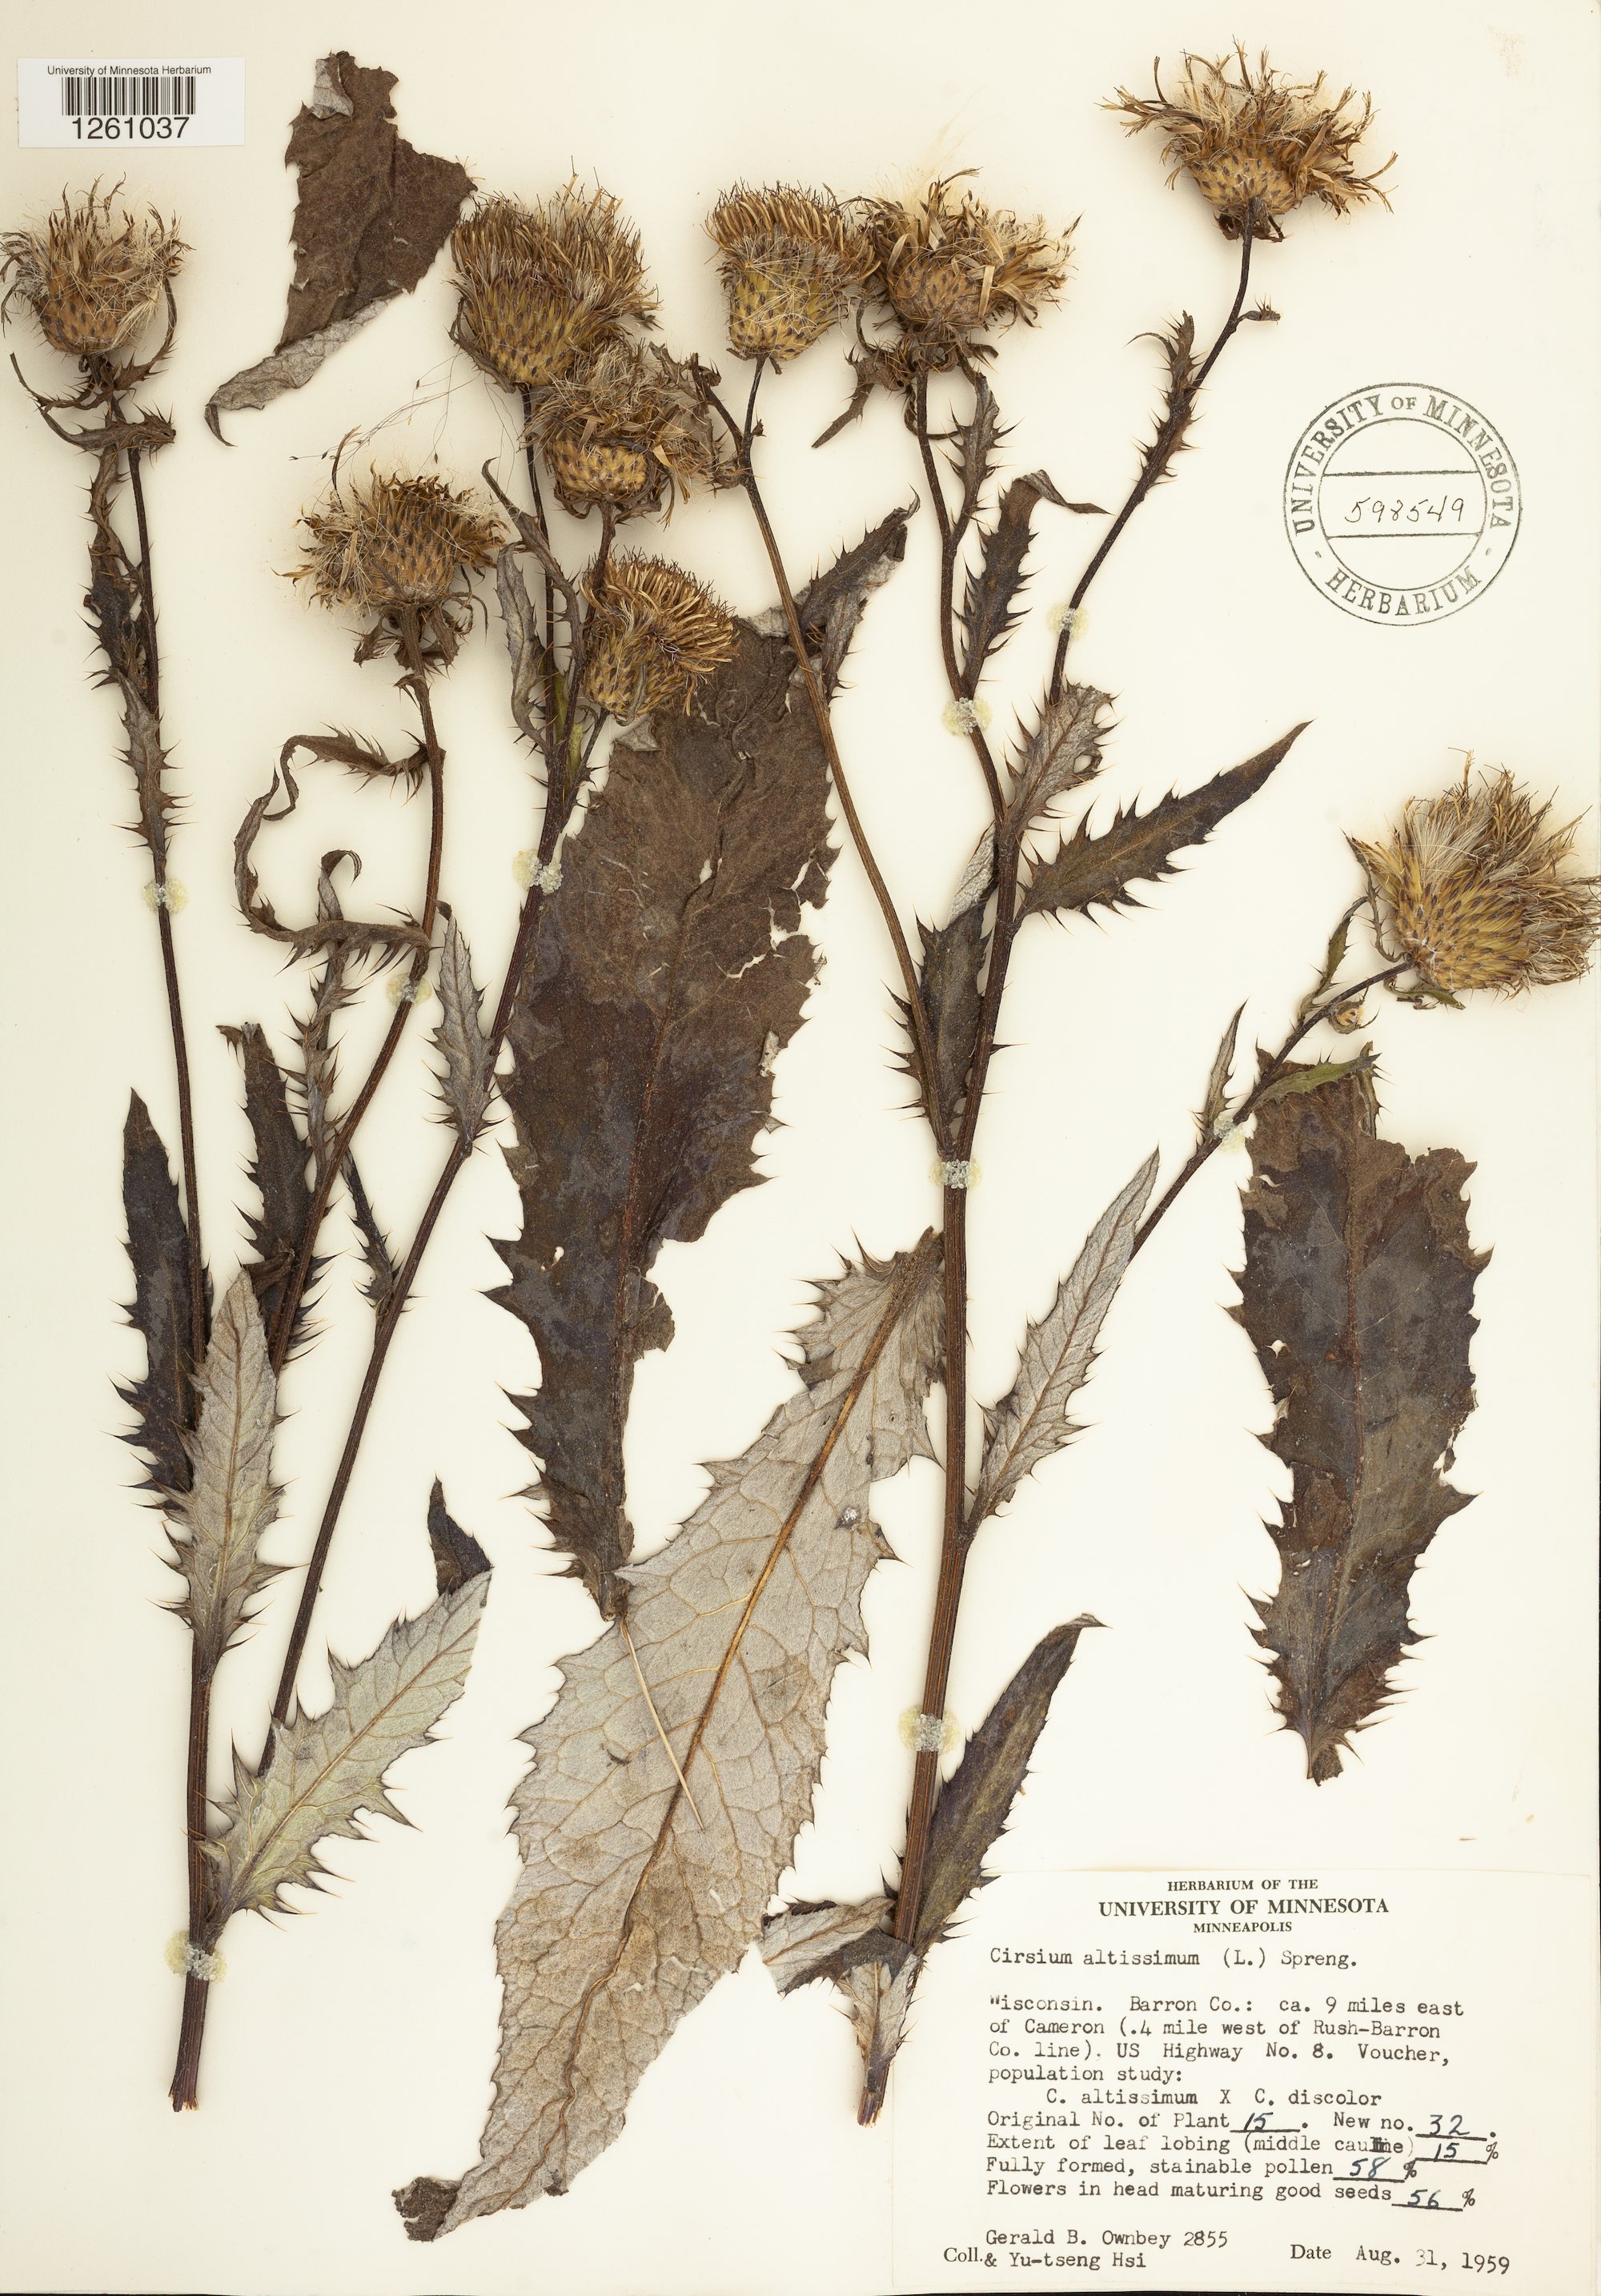 Tall Thistle specimen collected in August 31, 1959 in Barron County, Wisconsin.